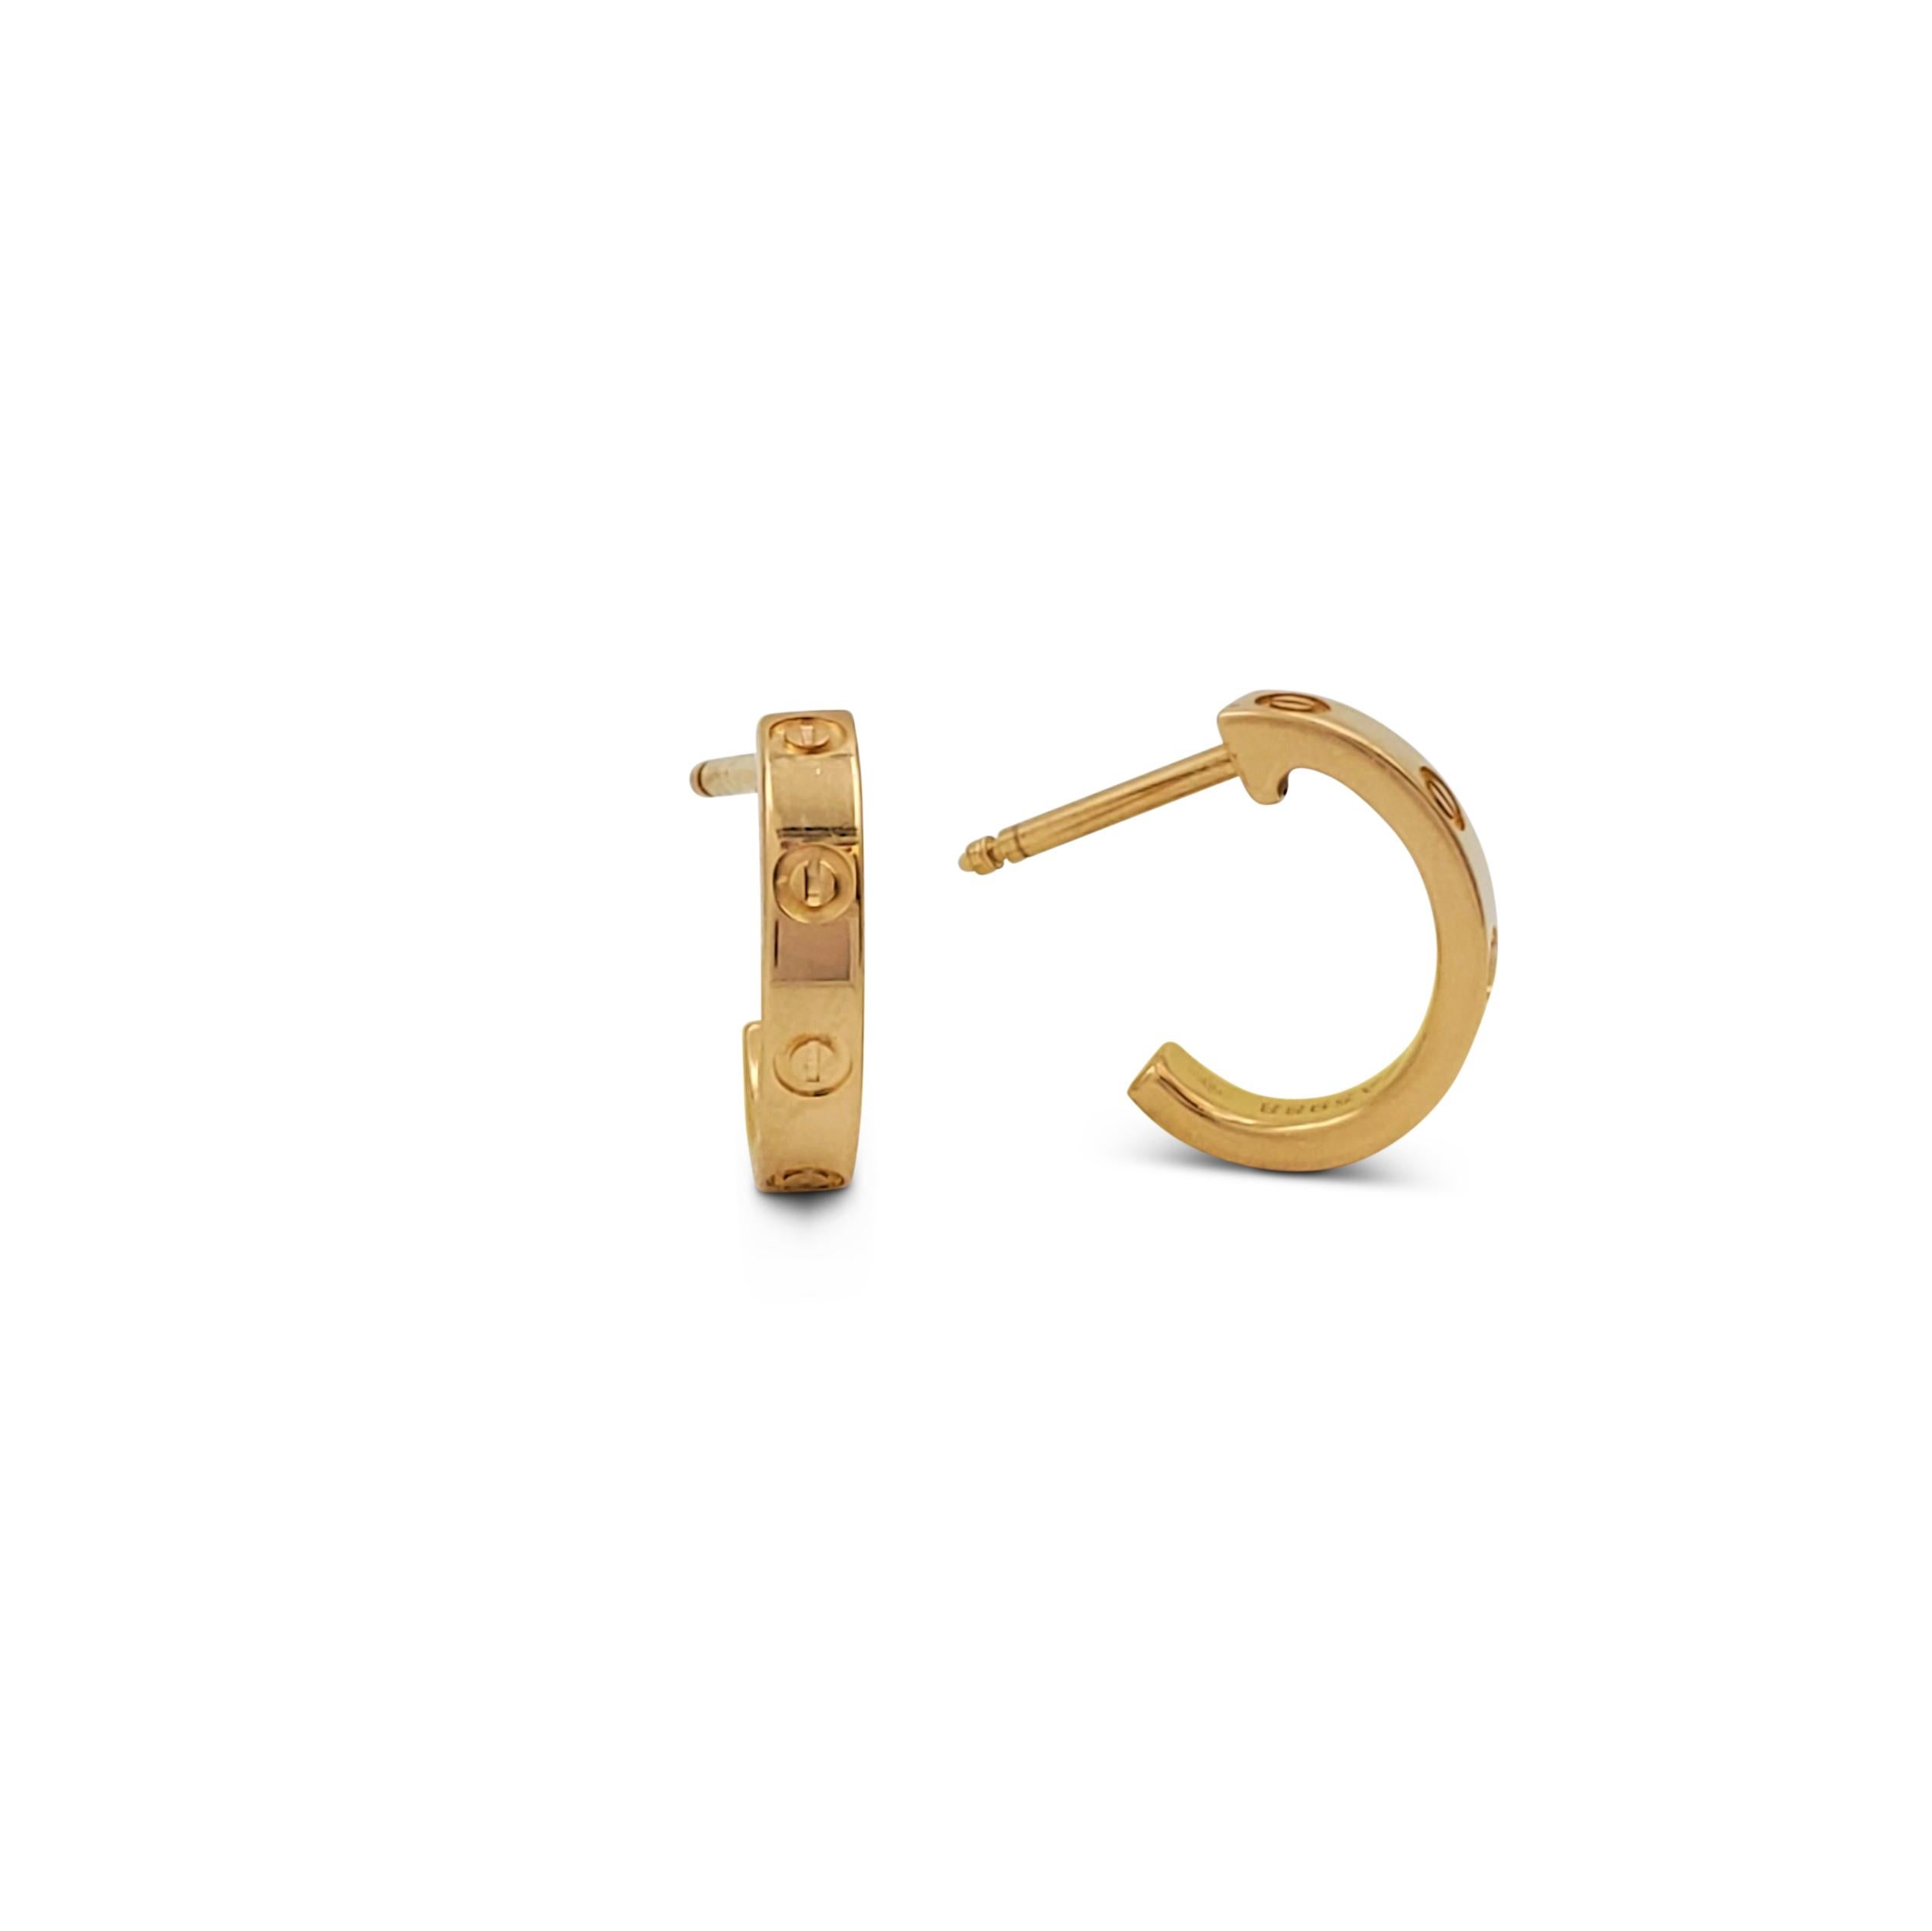 Authentic Cartier 'Love' earrings crafted in 18 karat yellow gold. Signed Cartier, 750, with serial number and hallmark. The earrings are not presented with the original box or papers. CIRCA 2010s.

Box: No
Papers: No